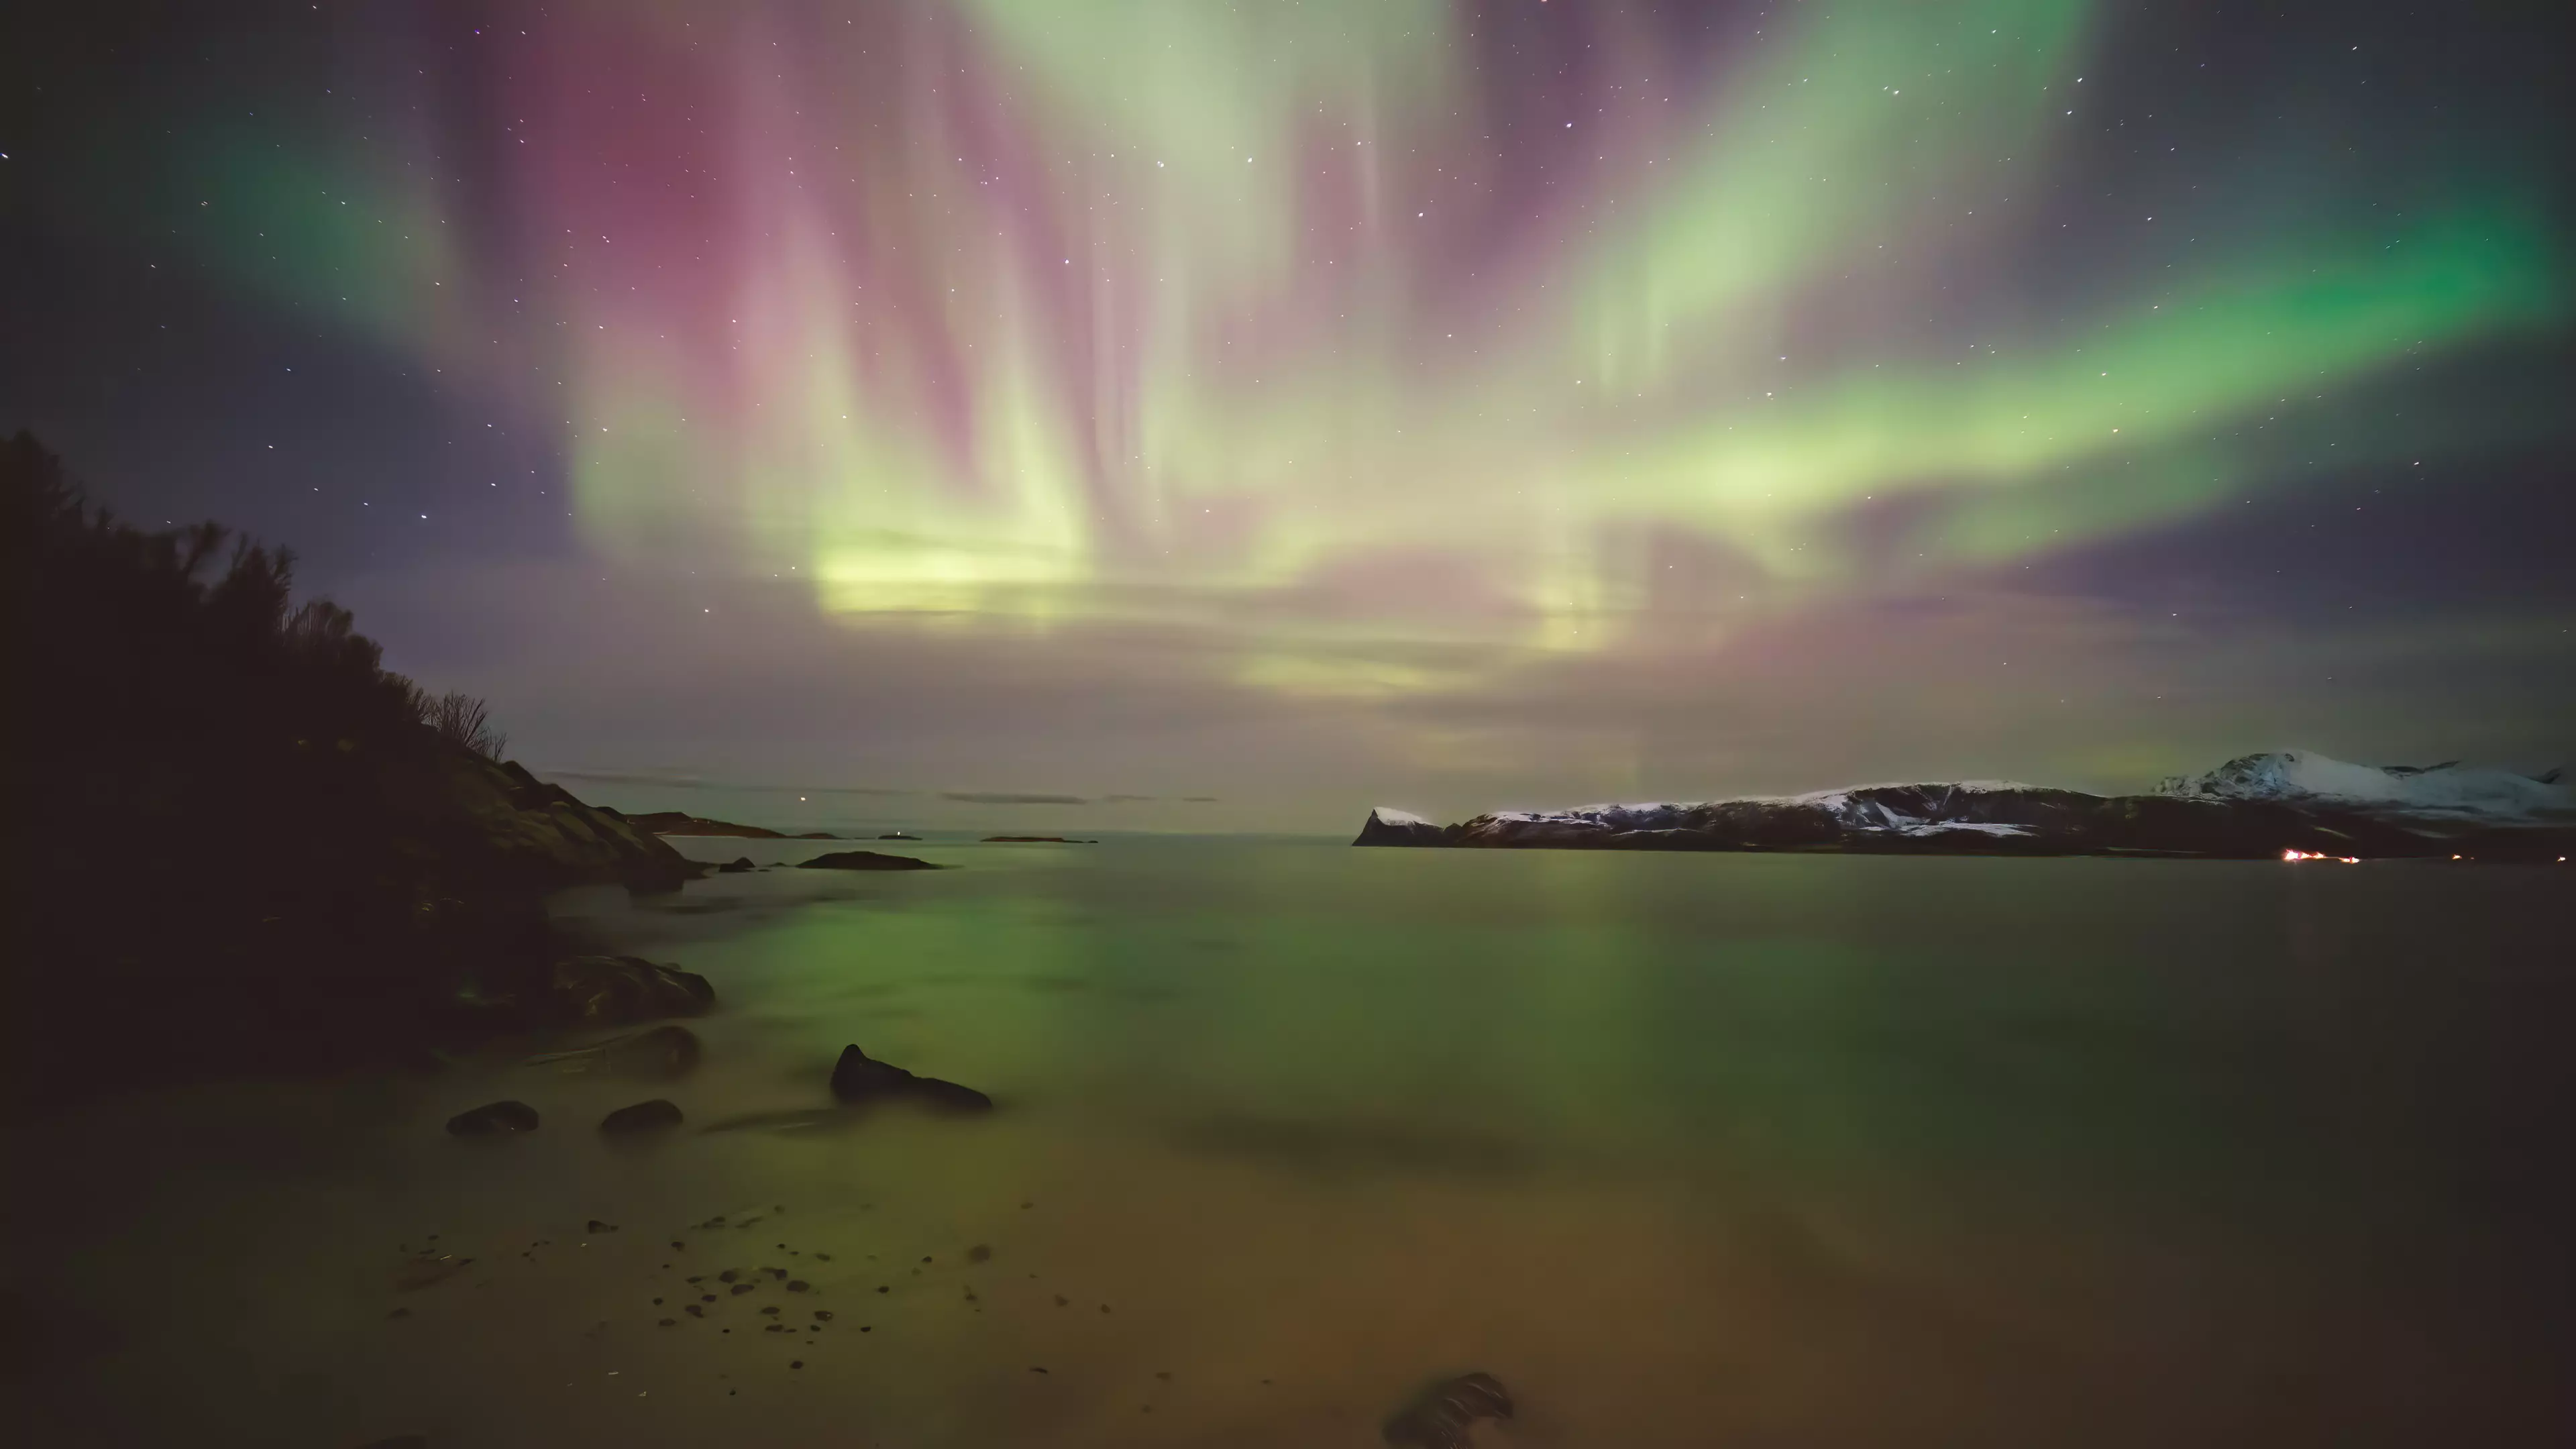 See The Northern Lights In Complete Comfort At These Amazing Destinations